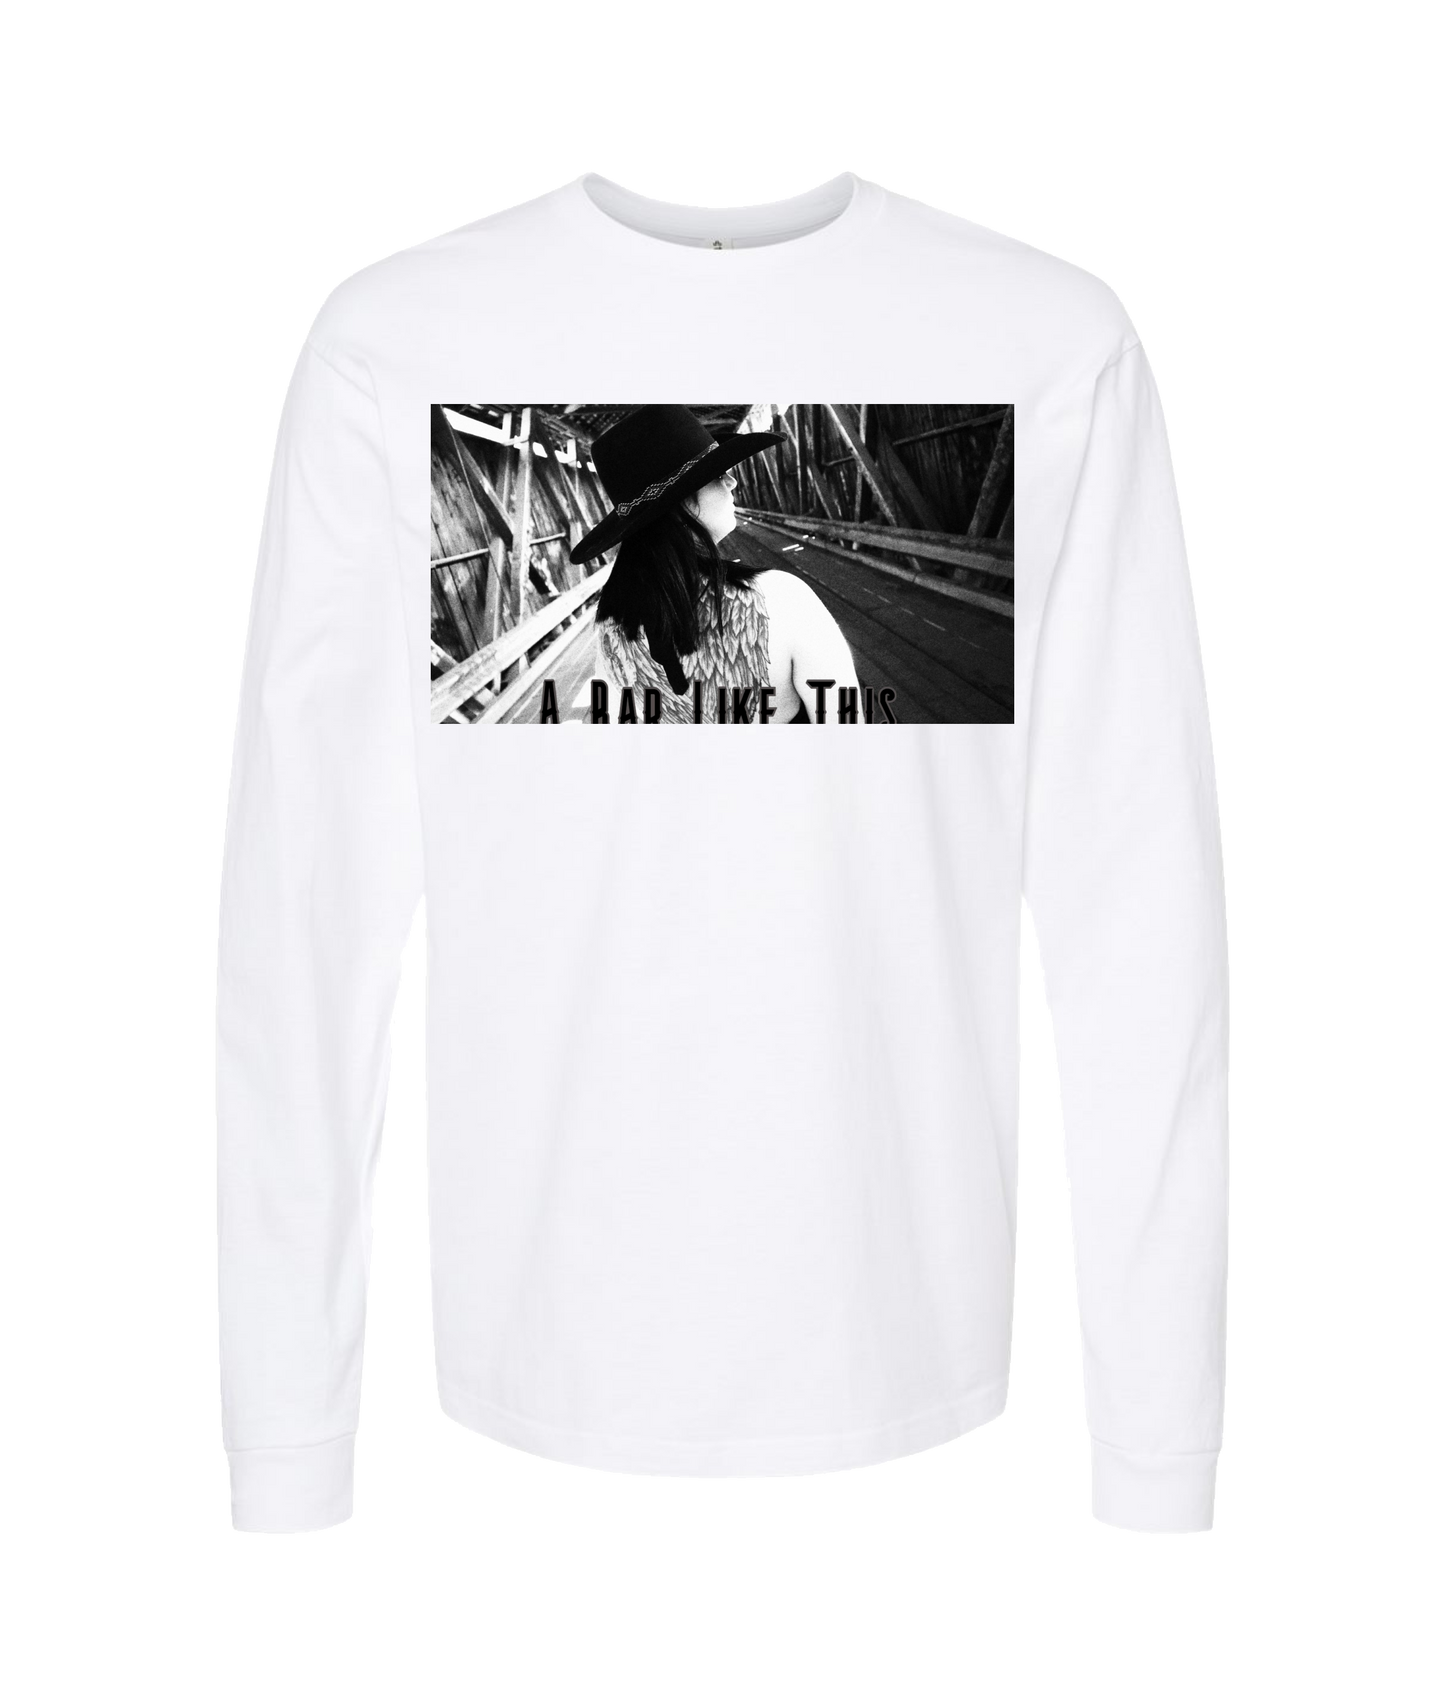 Michael Cage - A Bar Like This - White Long Sleeve T